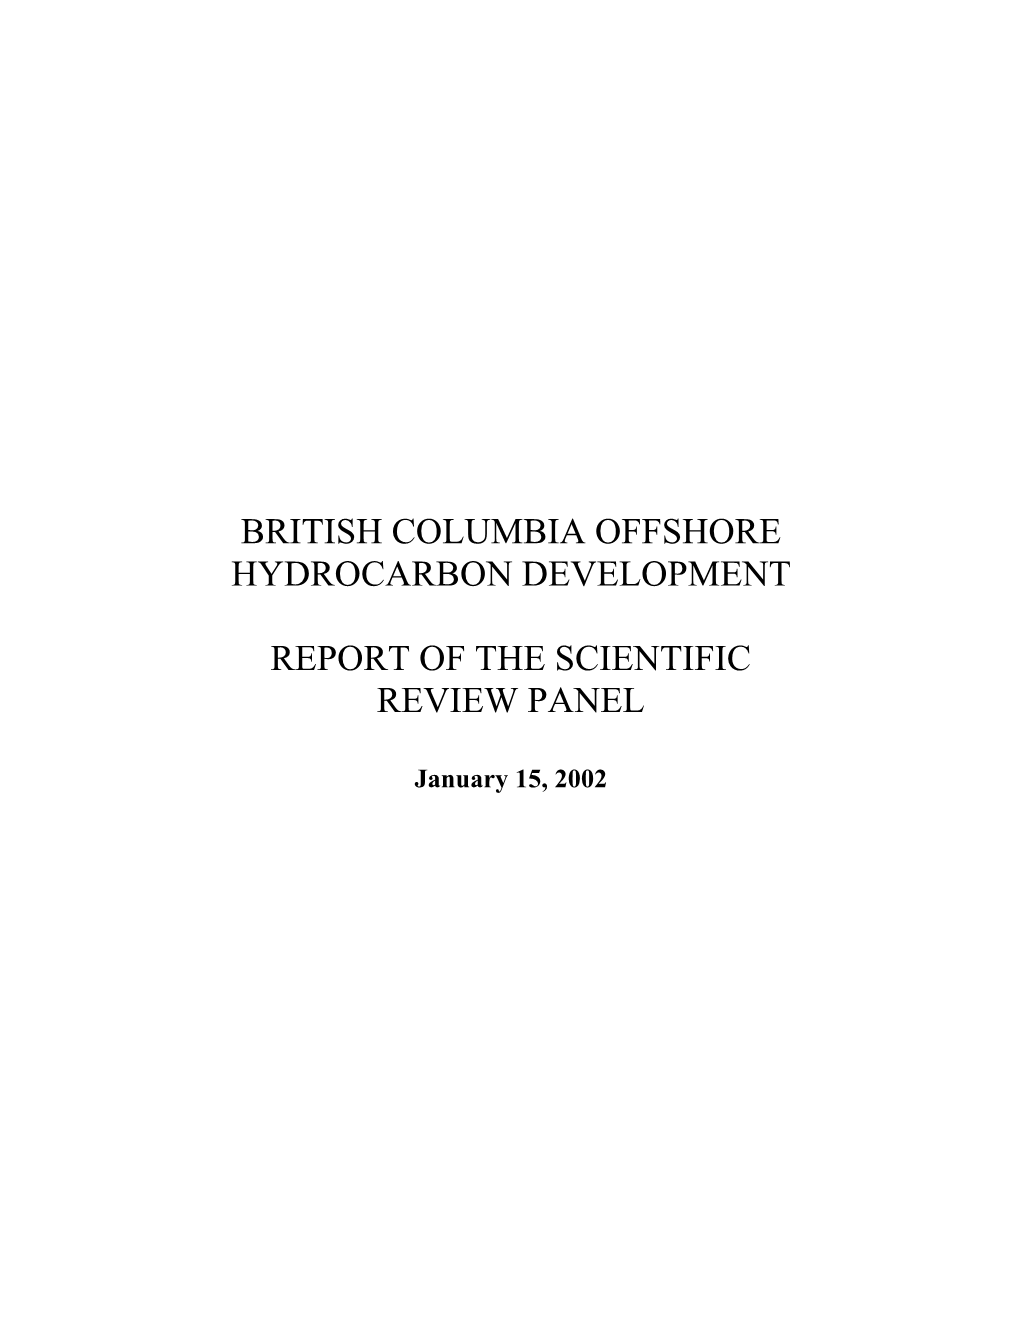 British Columbia Offshore Hydrocarbon Development: Report of the Scientific Review Panel